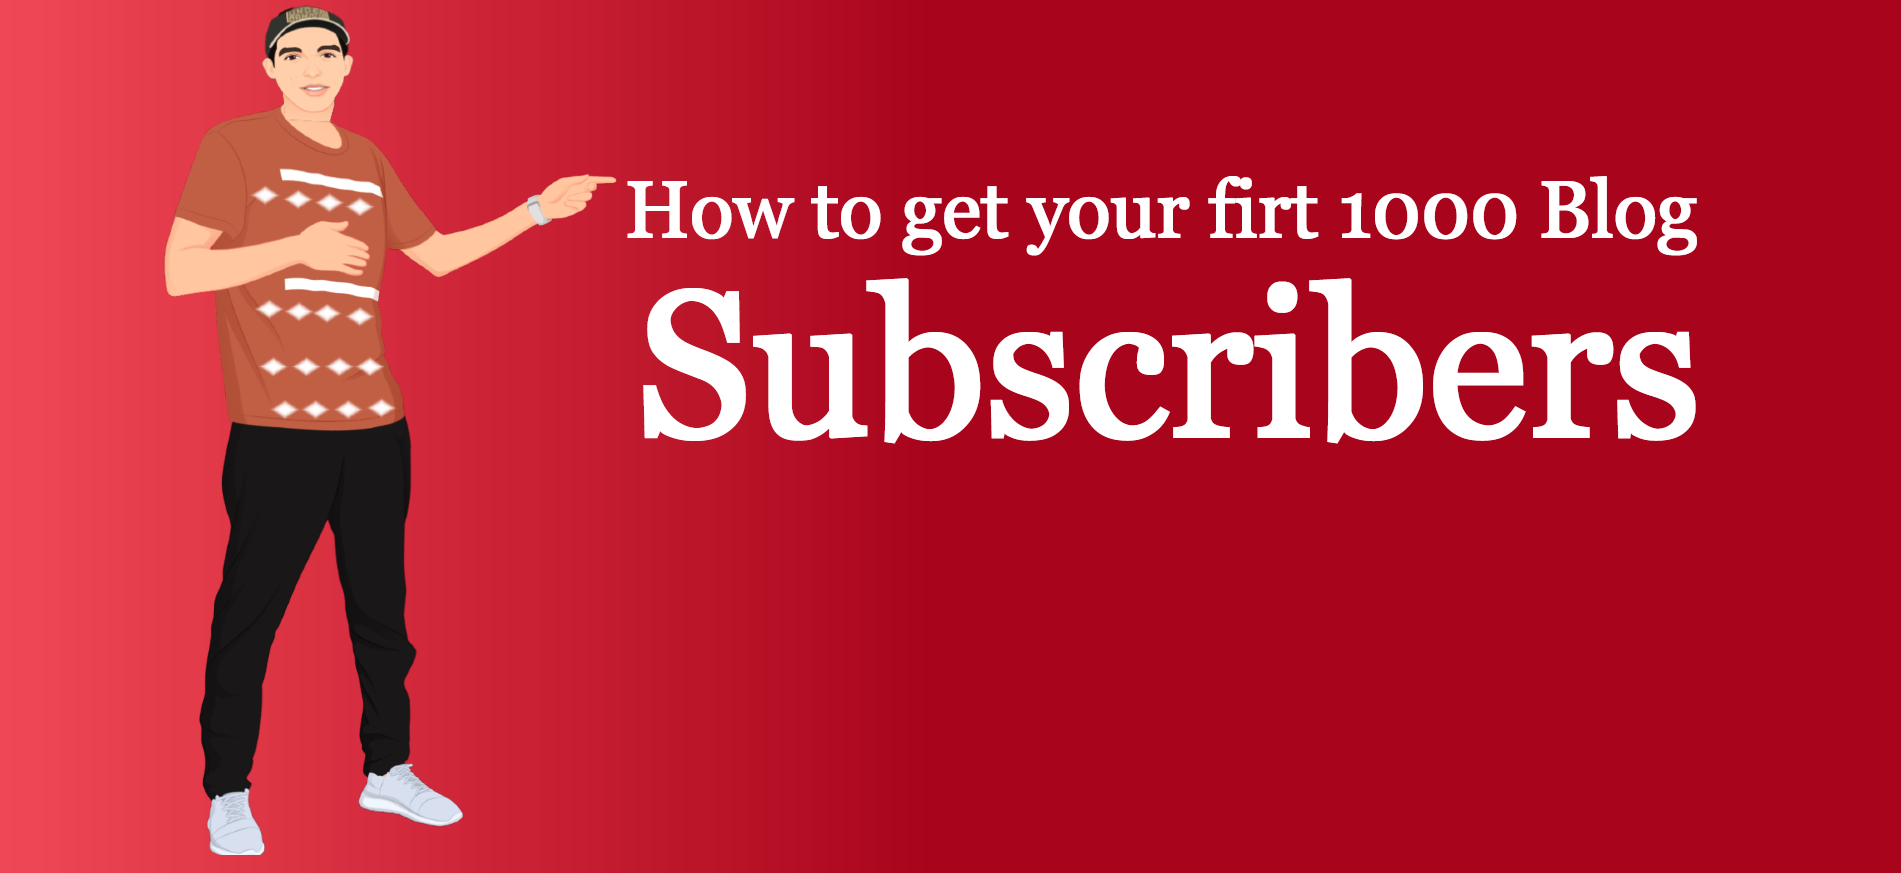 how to get your first 1000 blog subscribers